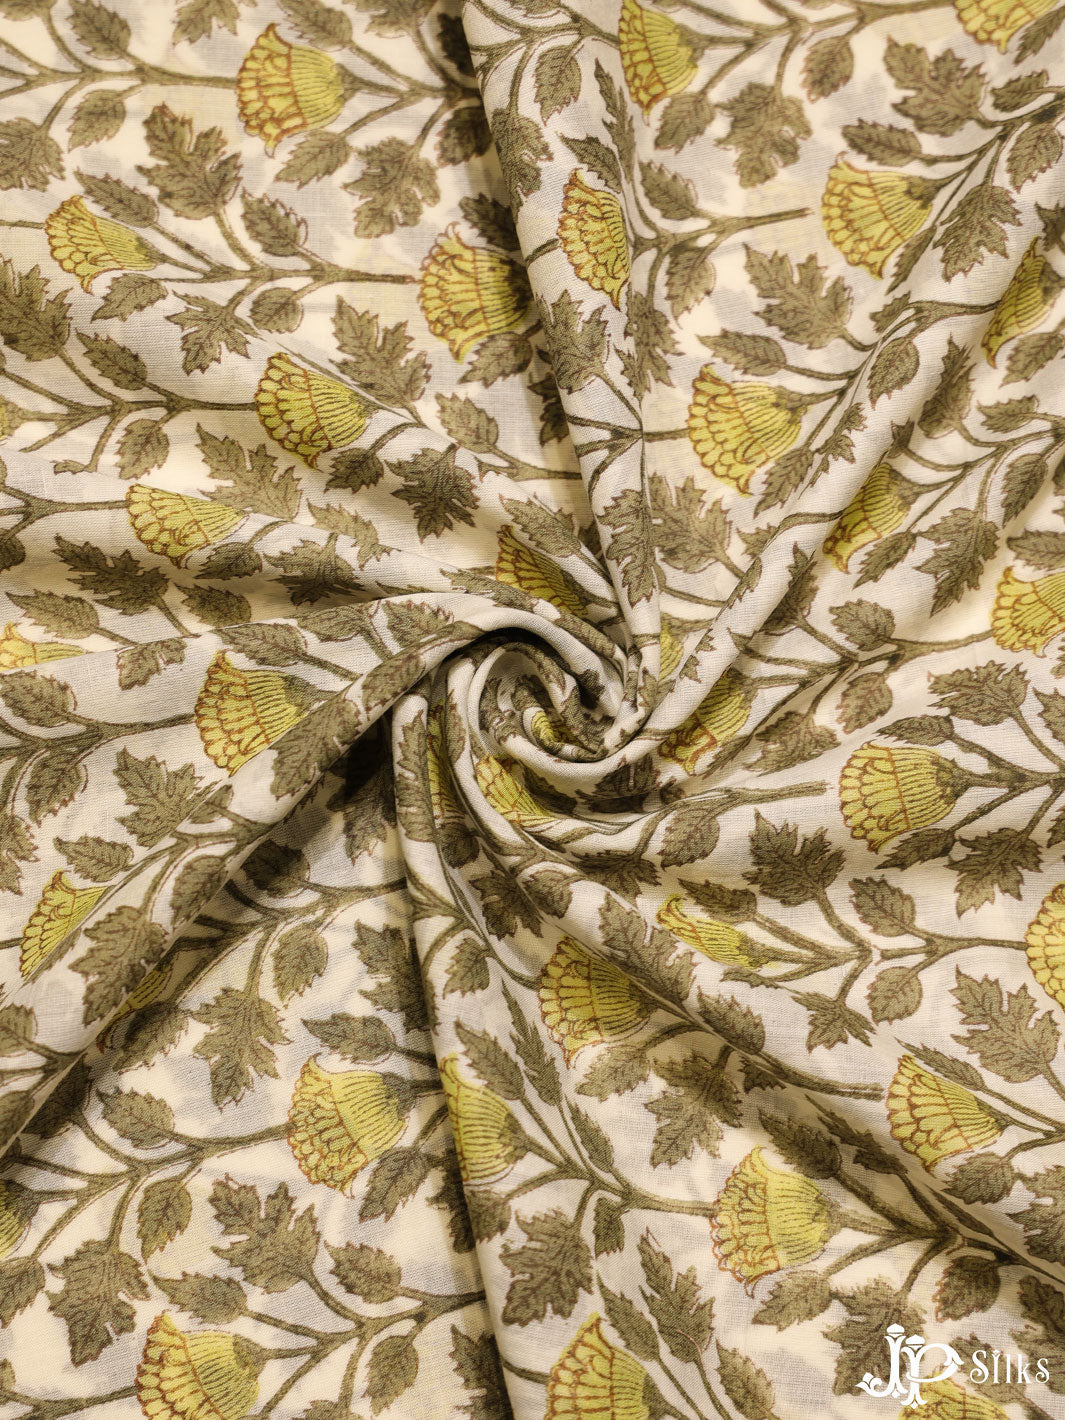 Off- White and Yellow Cotton Fabric - A7970 - View 3